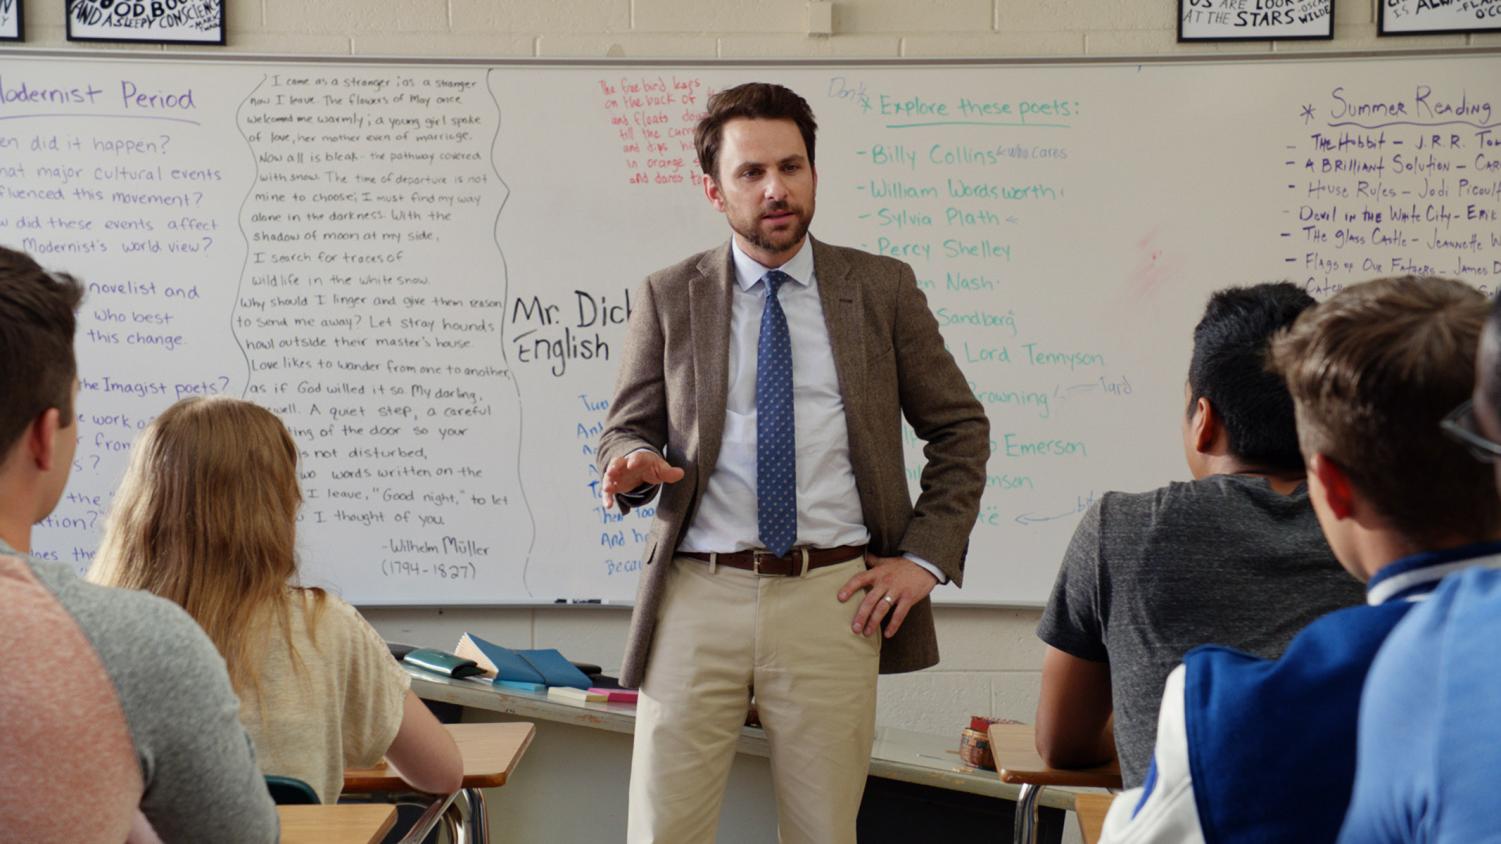 Charlie Day fights back in new movie The Columbia Chronicle